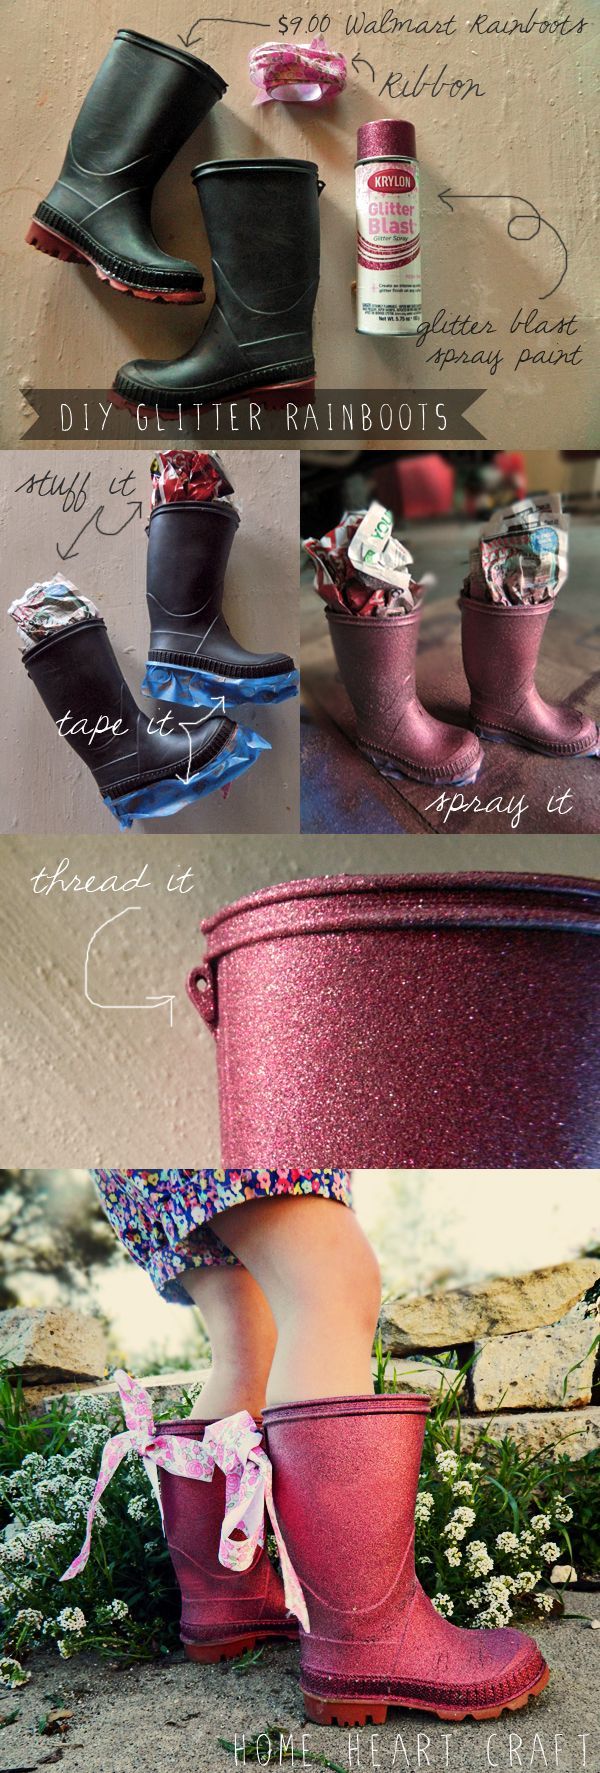 DIY Glitter Rain boots, so cute…can't wait to try this!